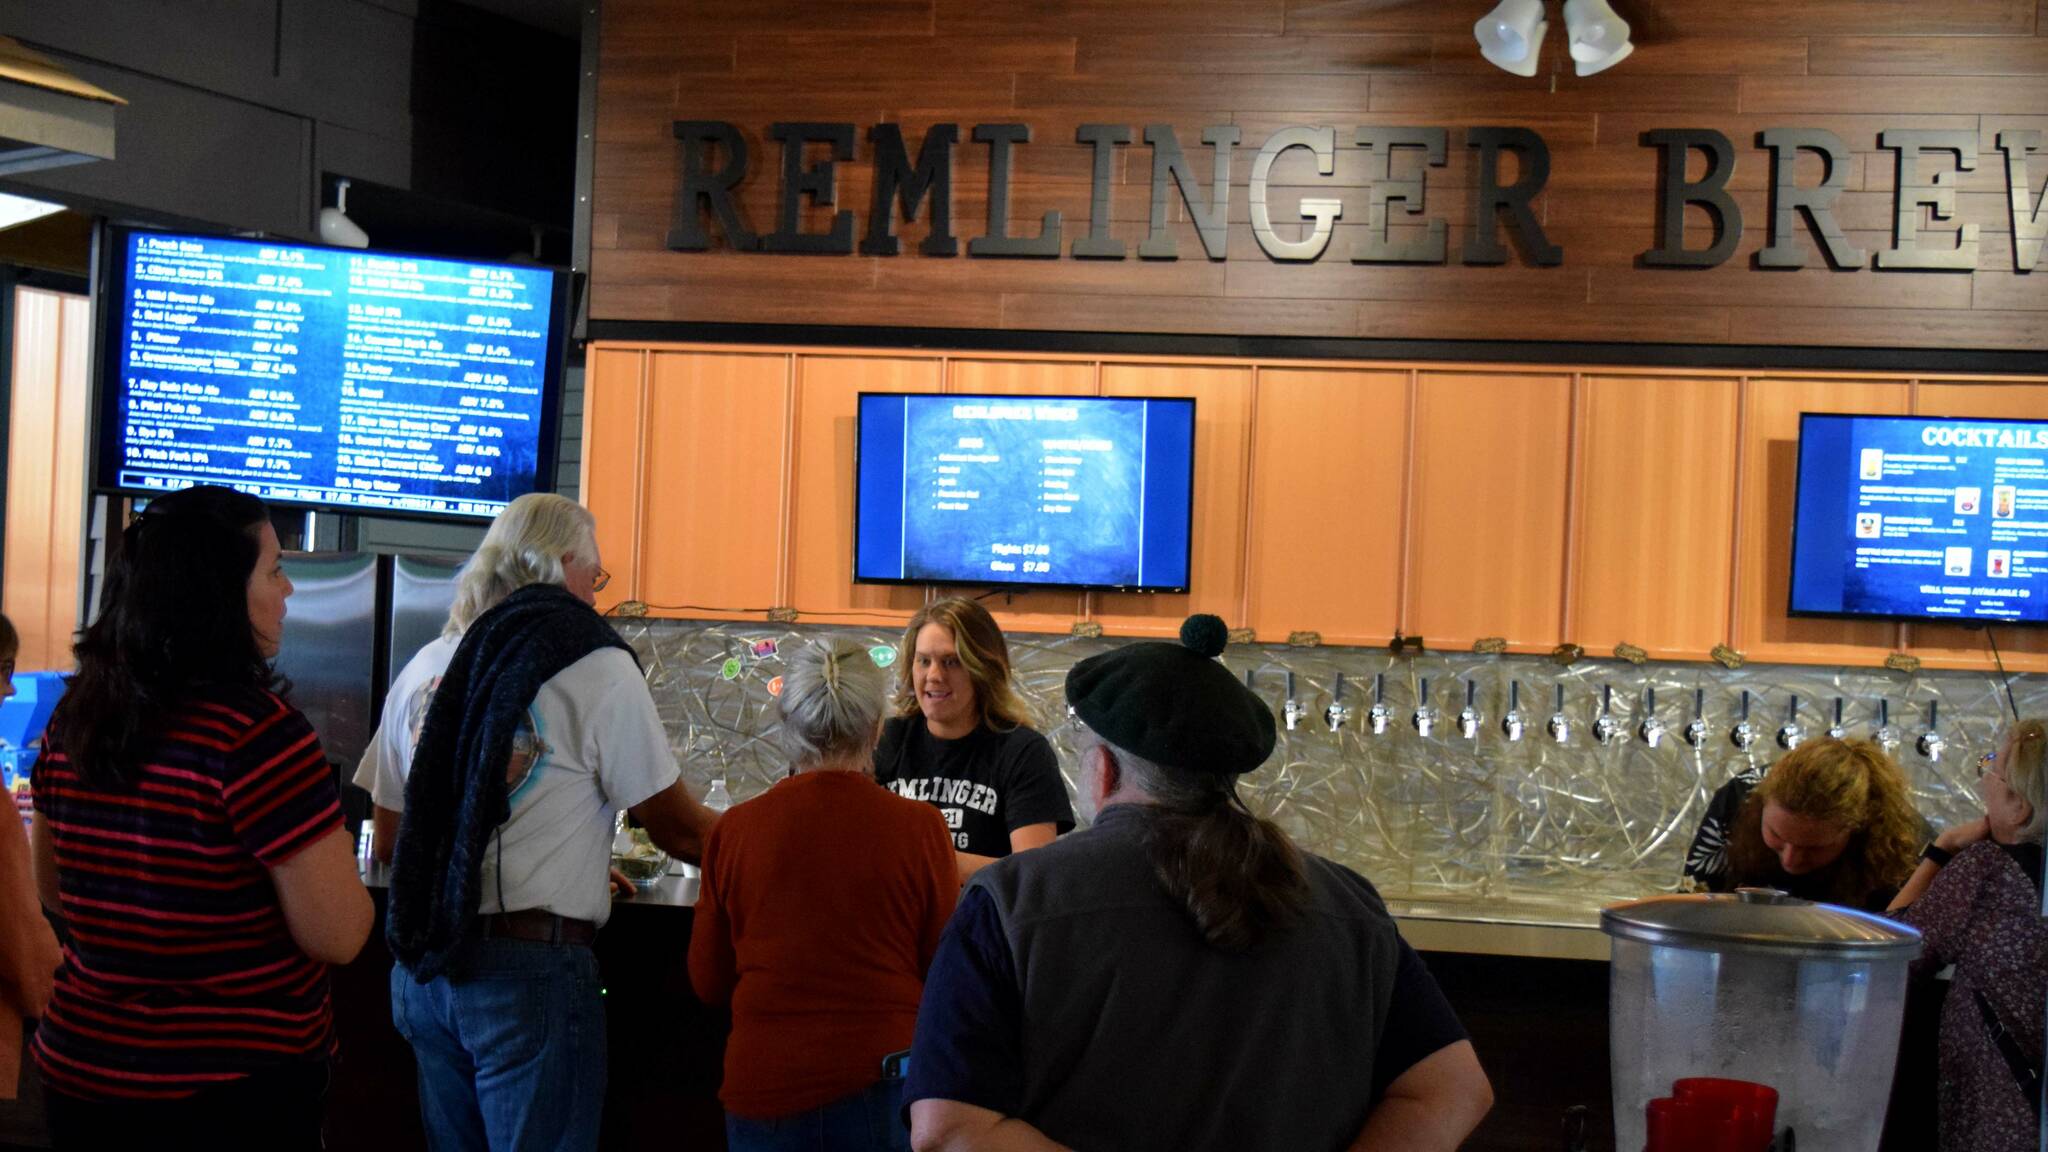 Patrons line up for drinks at Remlinger Farms Brewery. The brewery will host a fundrasier for Valley 104.9 on May 13. File photo Conor Wilson/Valley Record.